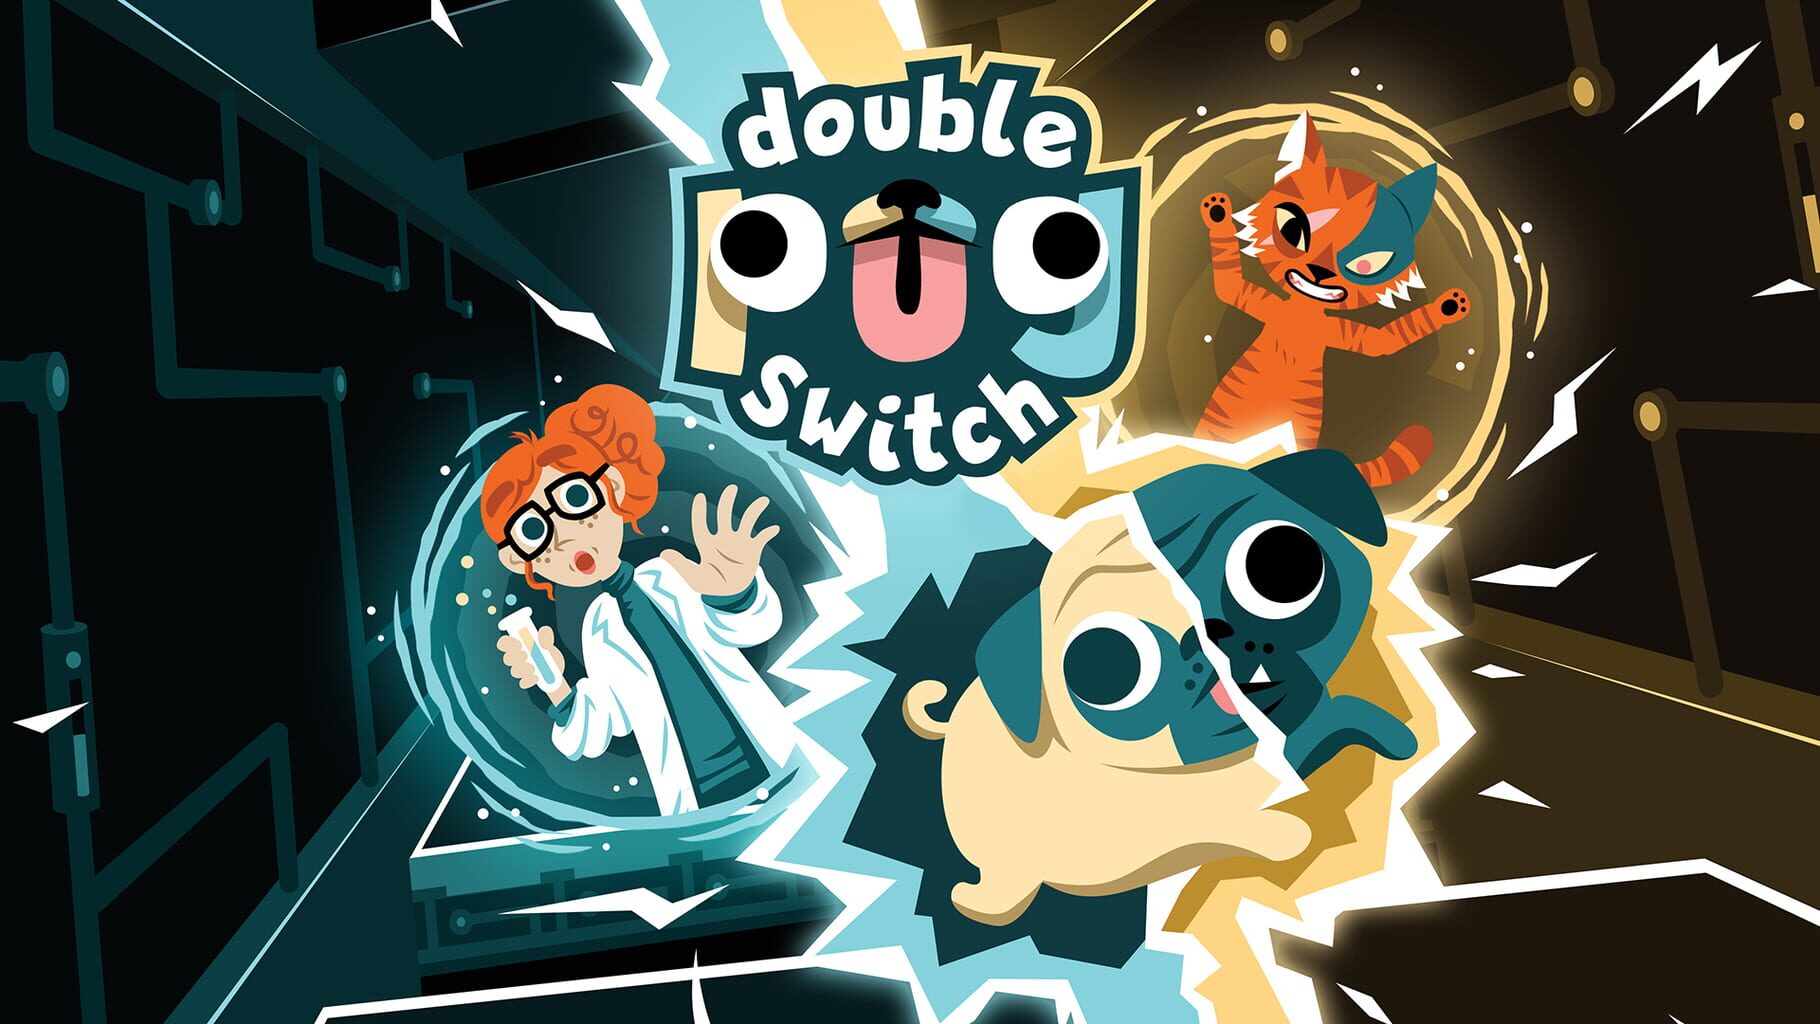 Double Pug Switch artwork